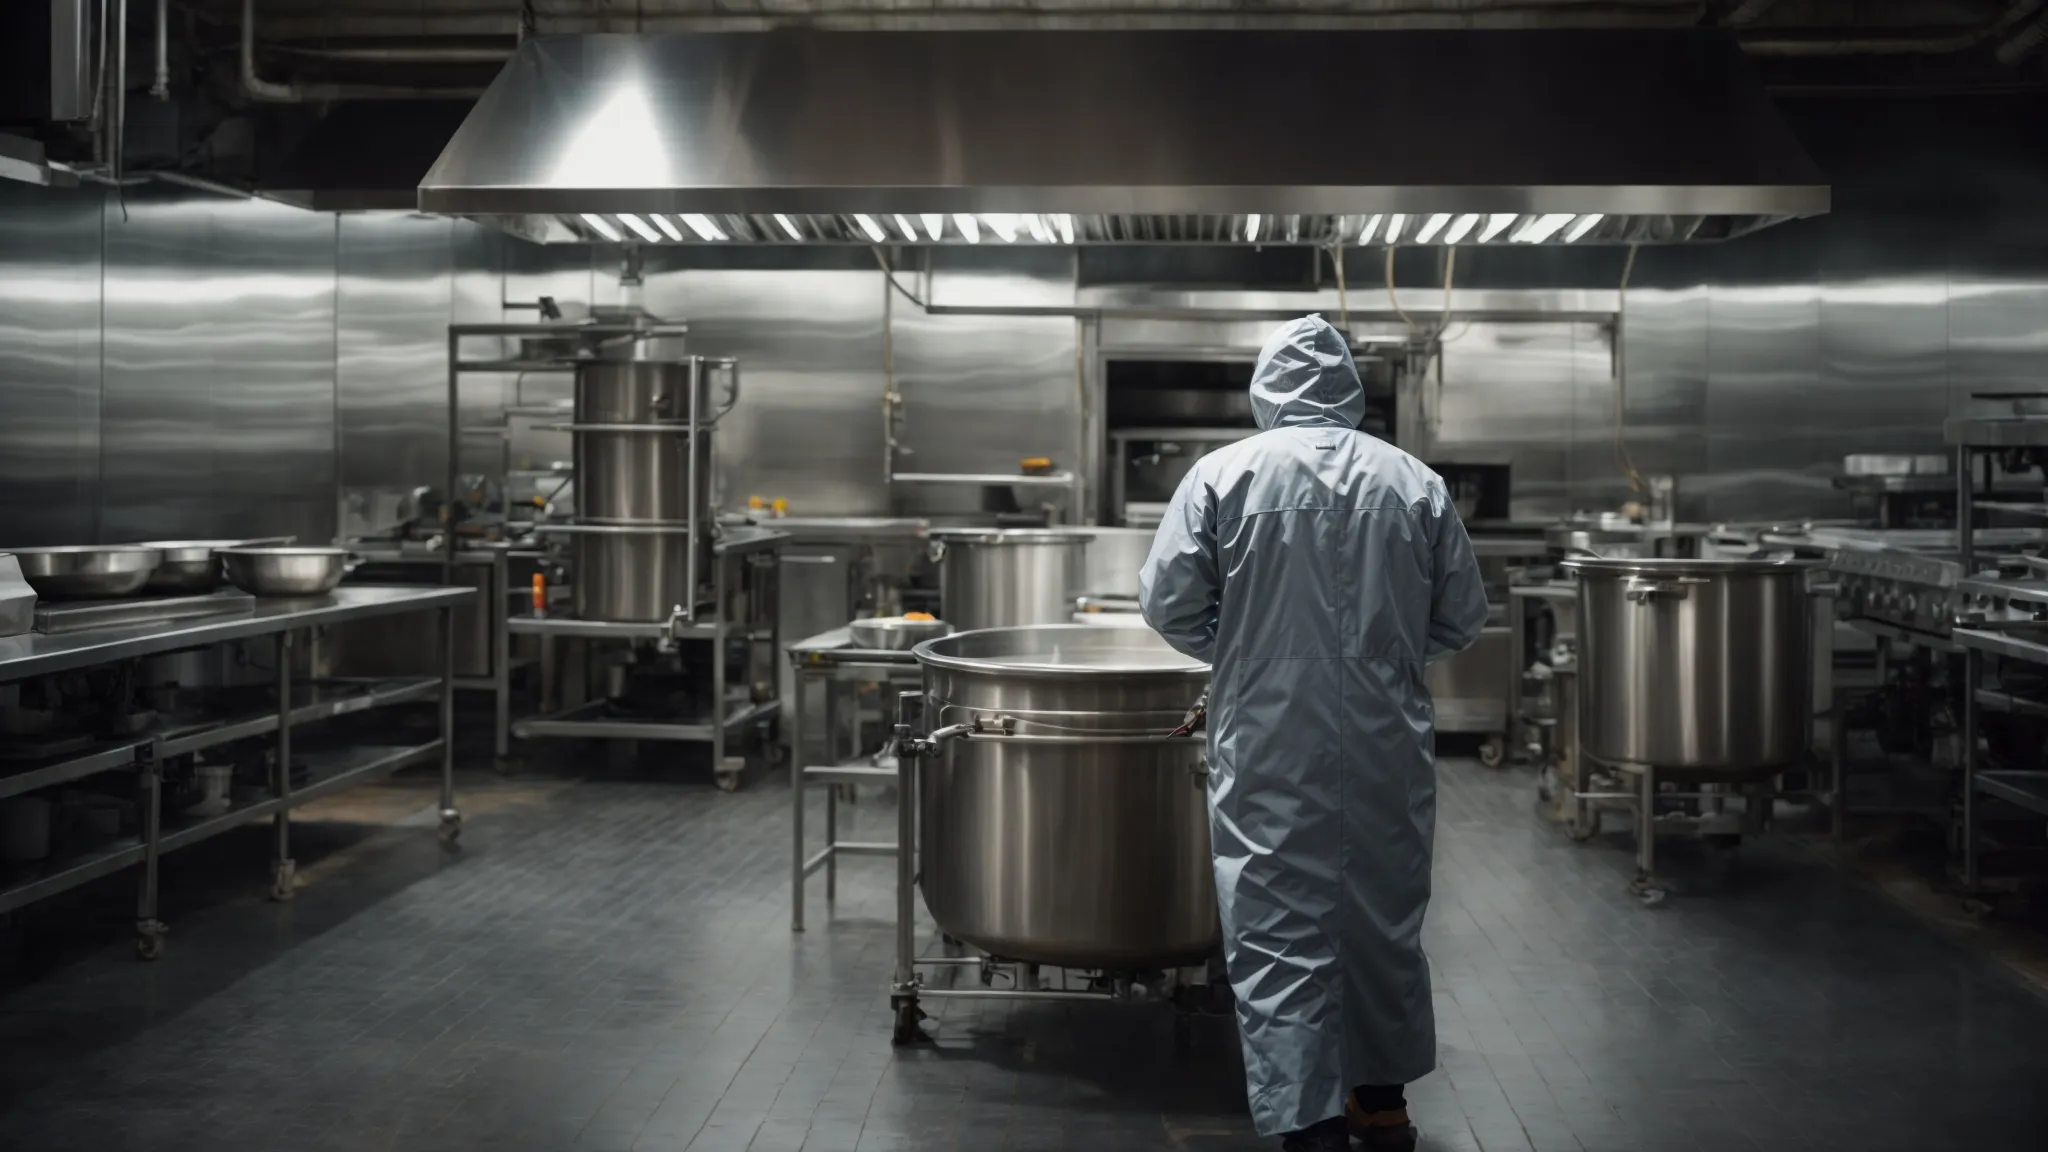 a team of professionals wearing protective gear meticulously cleans a large commercial kitchen exhaust system.